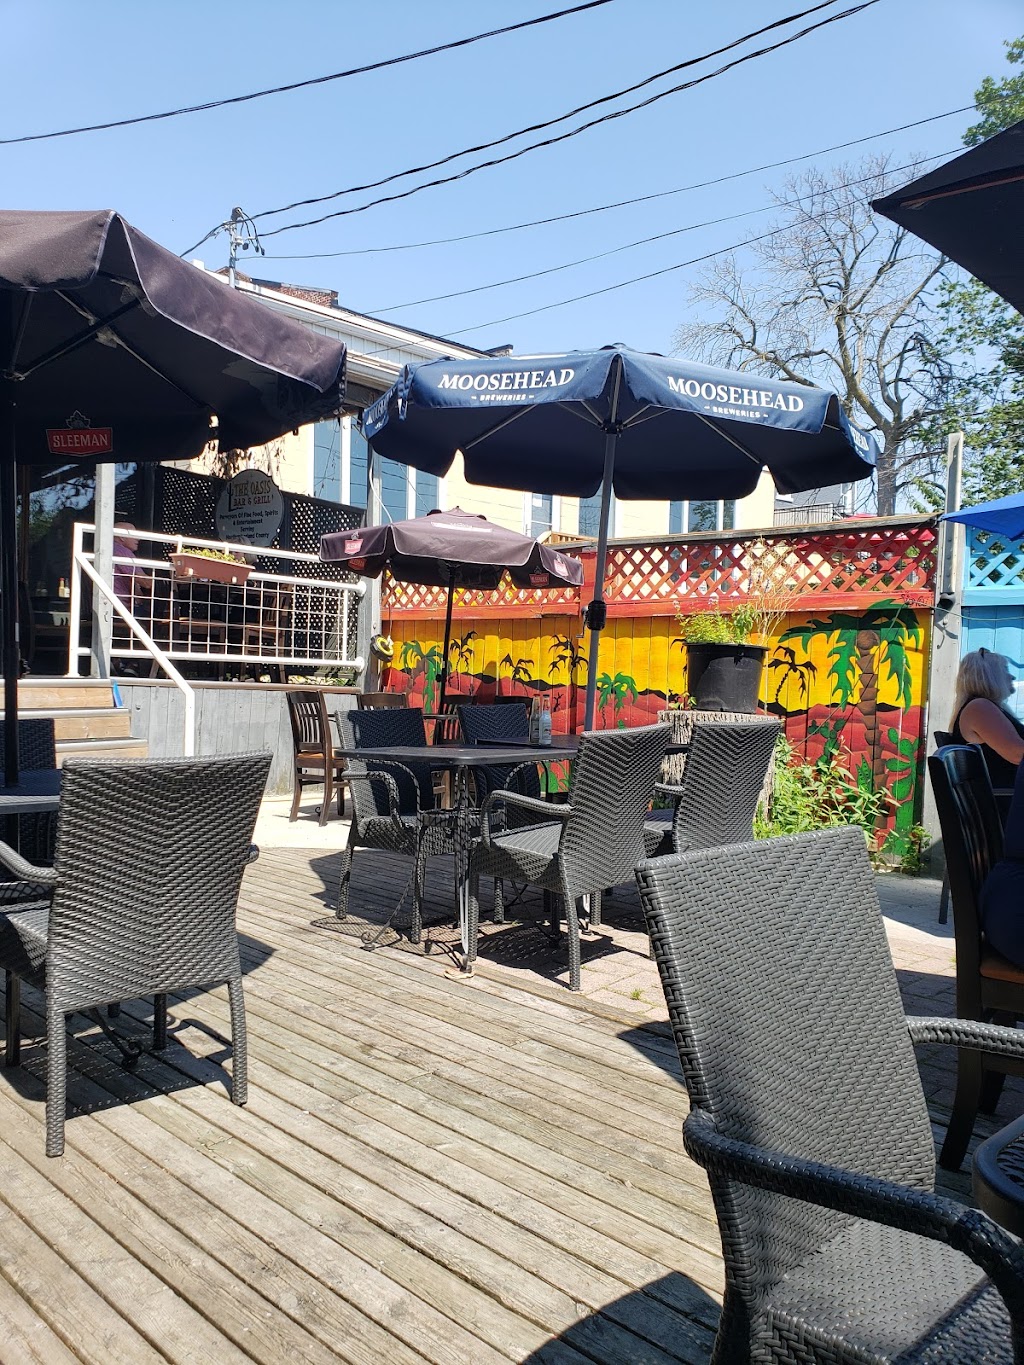 Oasis Bar & Grill | 31 King St E, Cobourg, ON K9A 1K6, Canada | Phone: (905) 372-6634